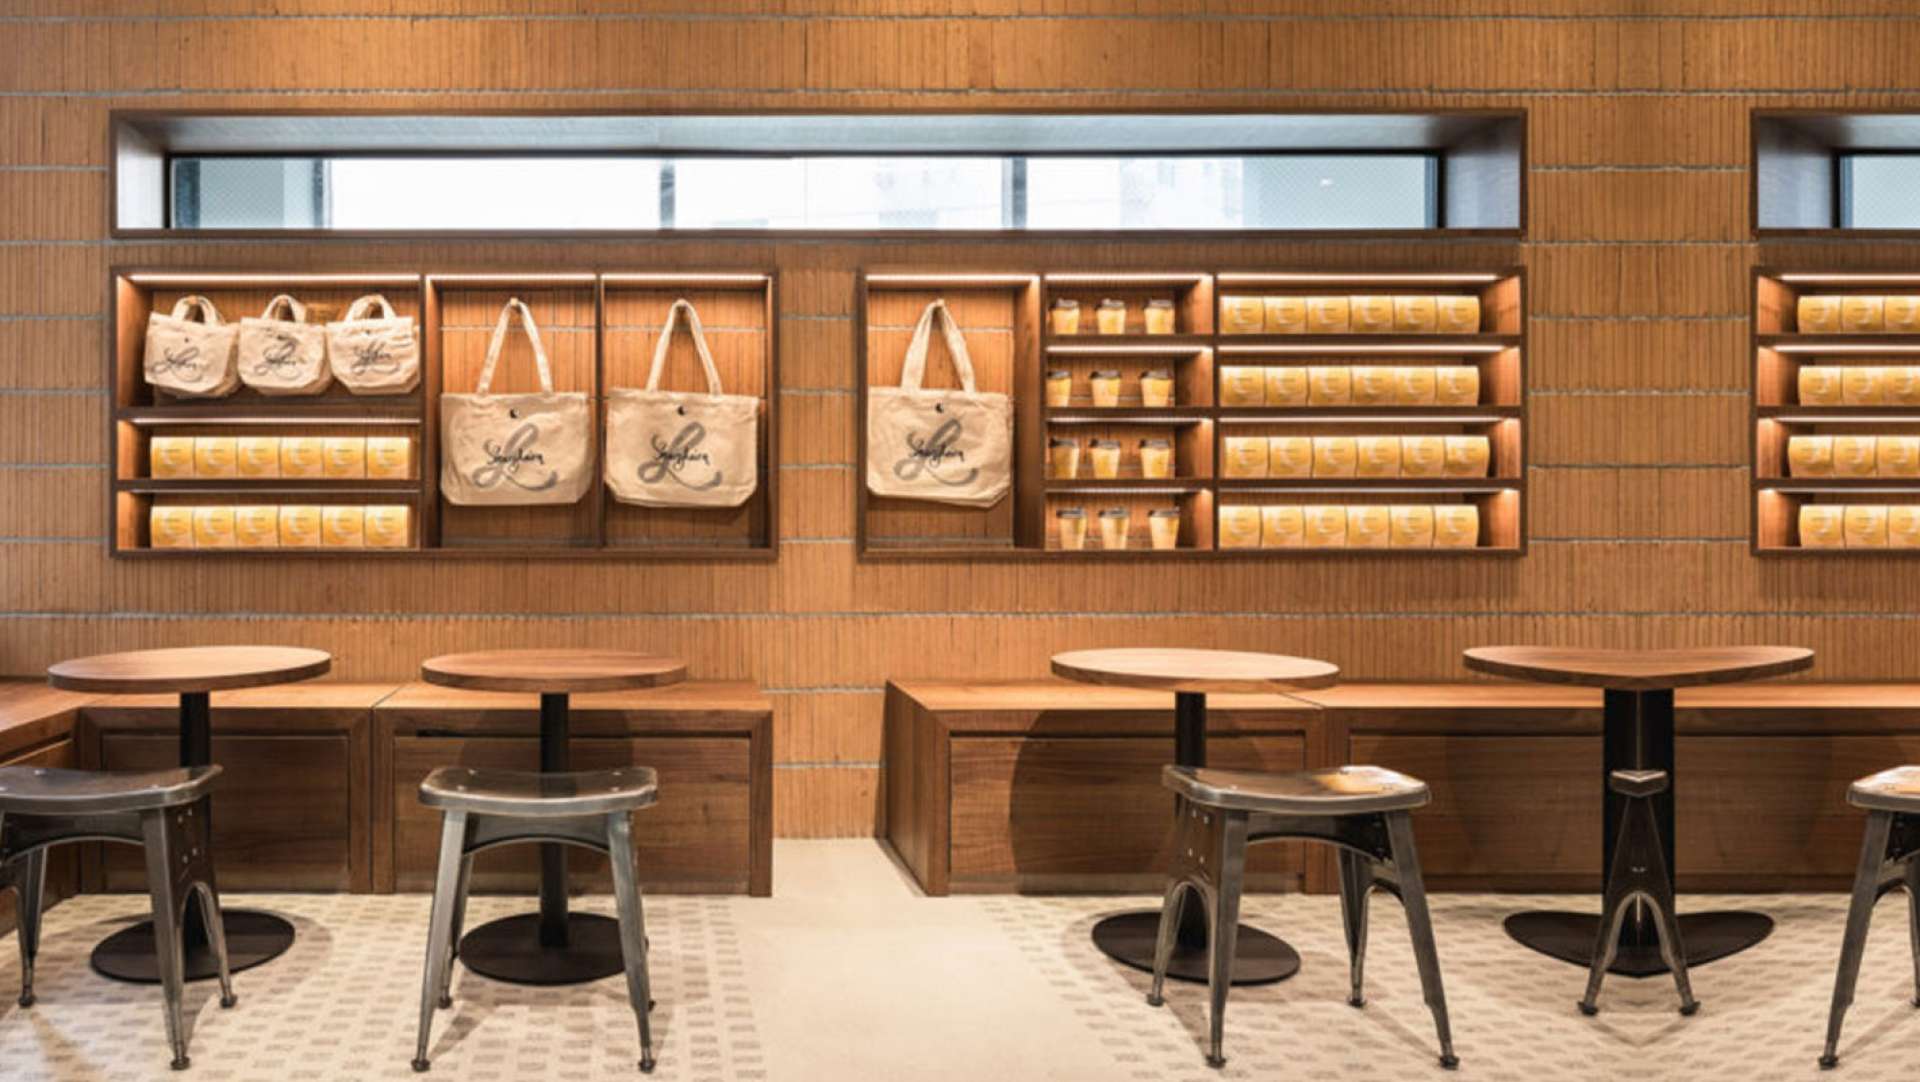 Luneurs uses a a mix of raw and rustic to launch their latest store